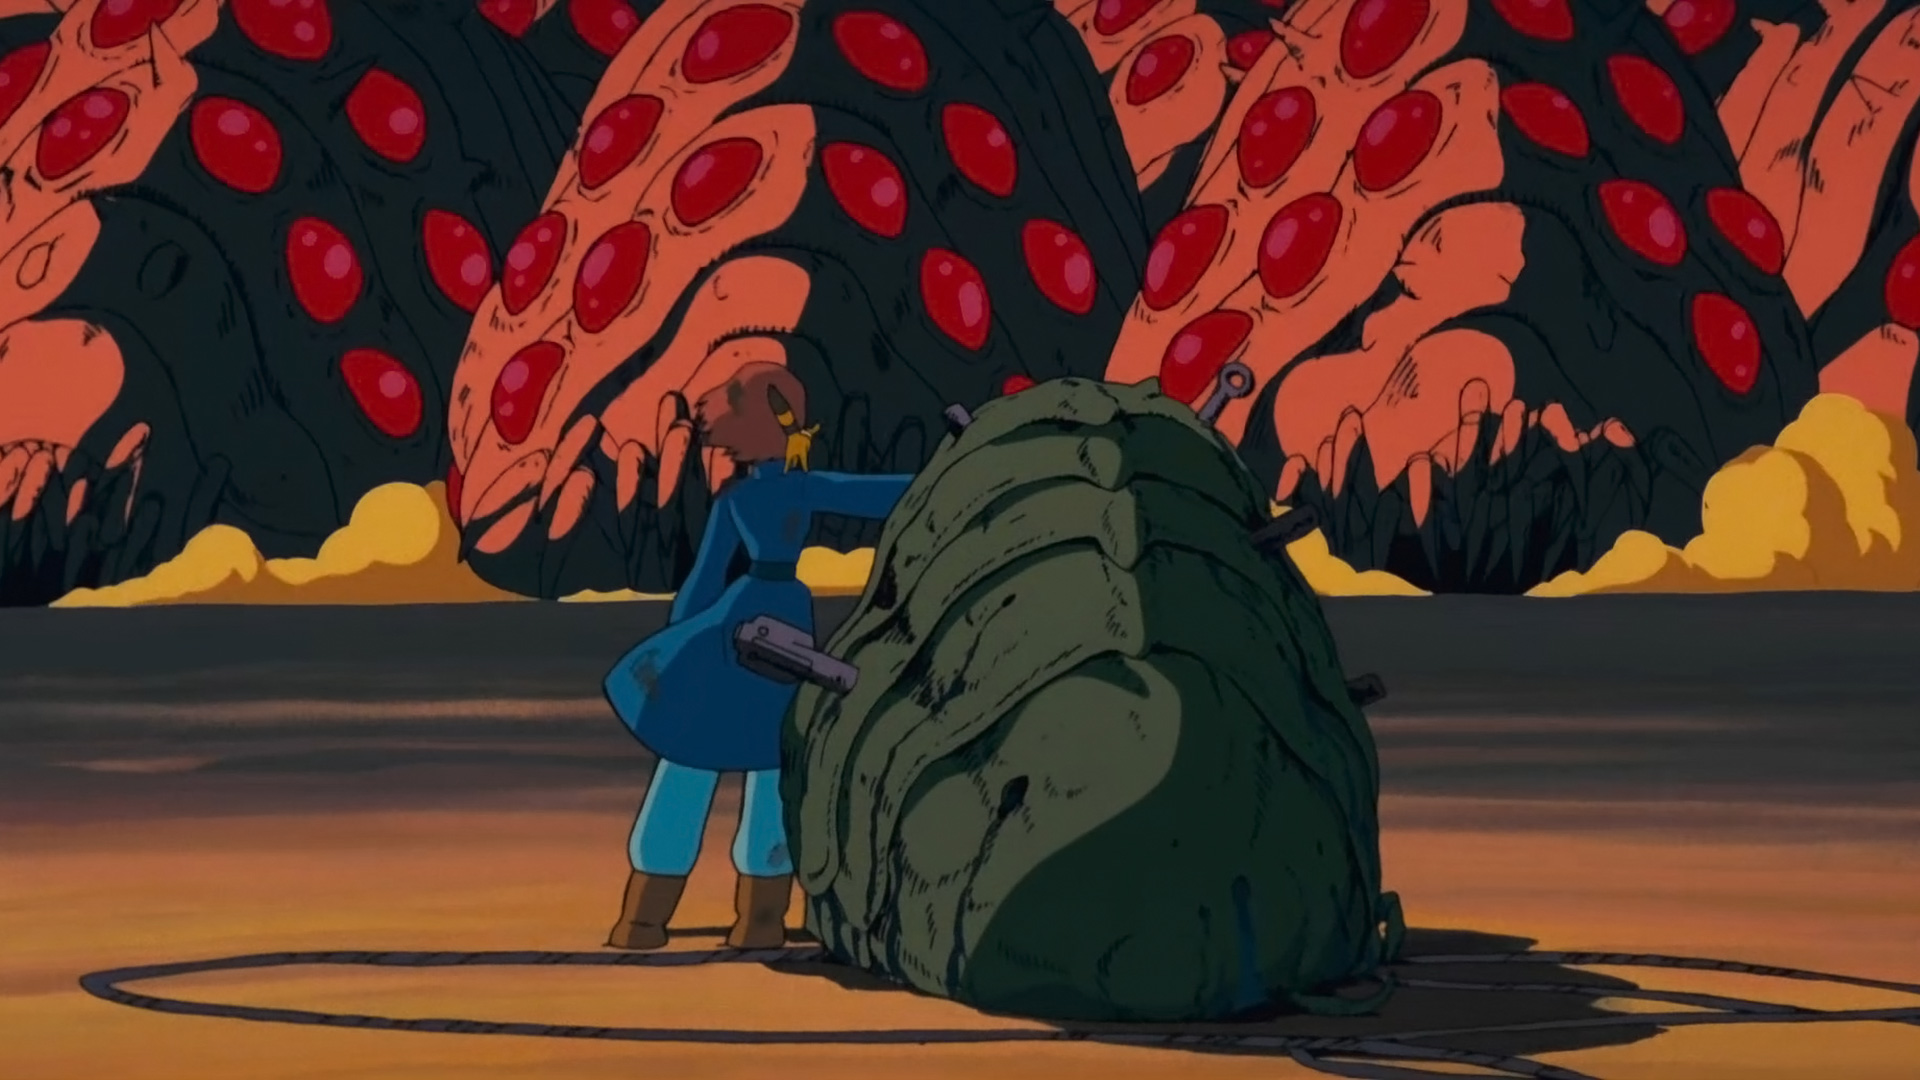 Anime Nausicaa Of The Valley Of The Wind 1920x1080